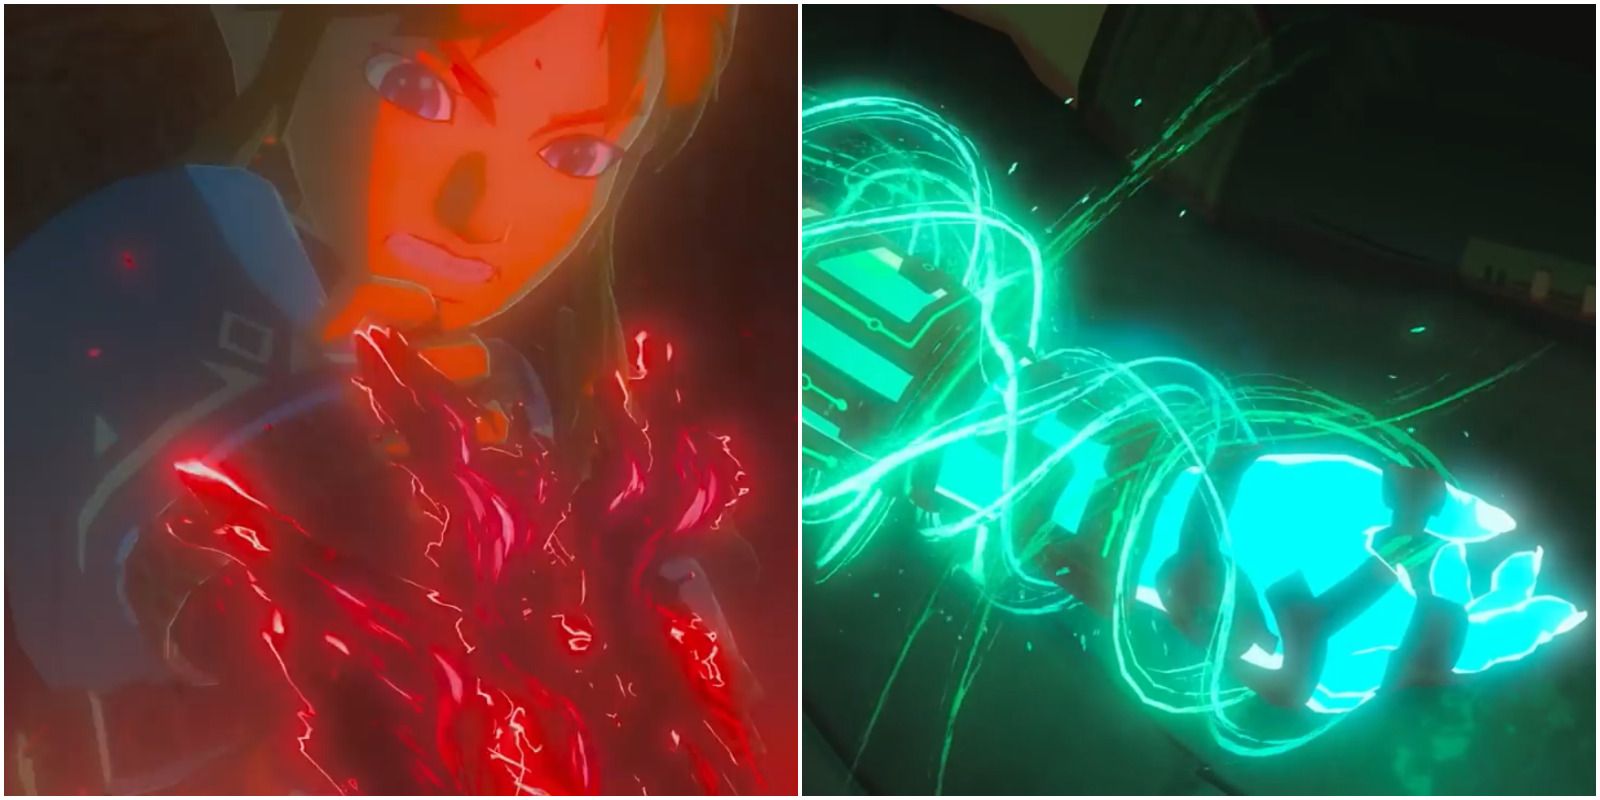 The Legend Of Zelda Breath Of The Wild 2 Trailer Red Malice Attaching To Link's Right Arm And Green Energy Emerging From Bracer Screenshots